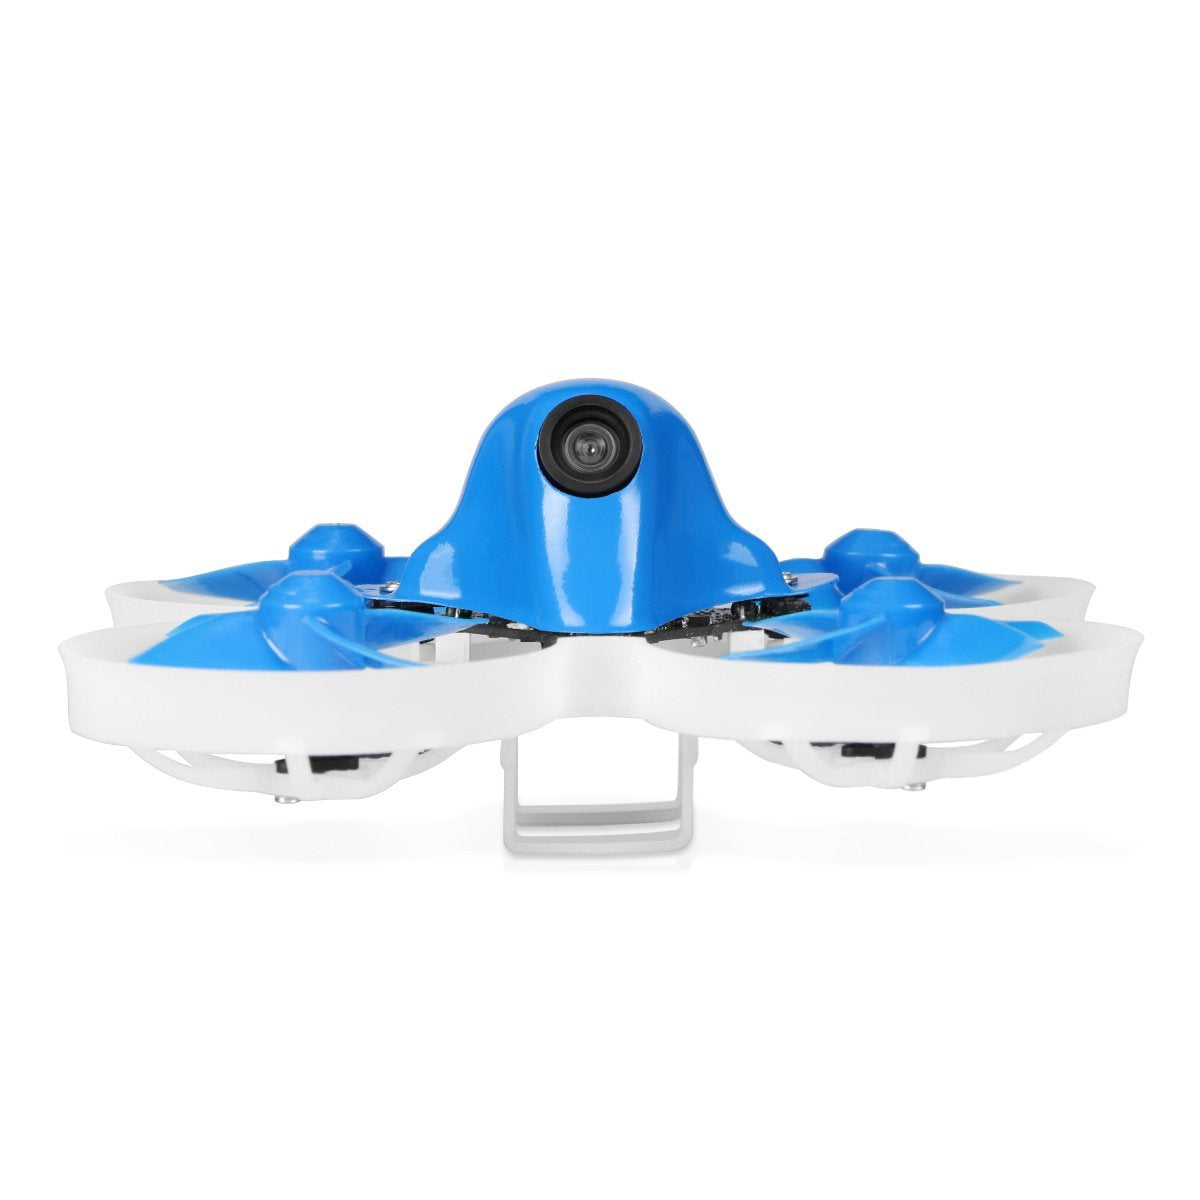 Beta75 Pro 2 Brushless Whoop Quadcopter -FRSKY